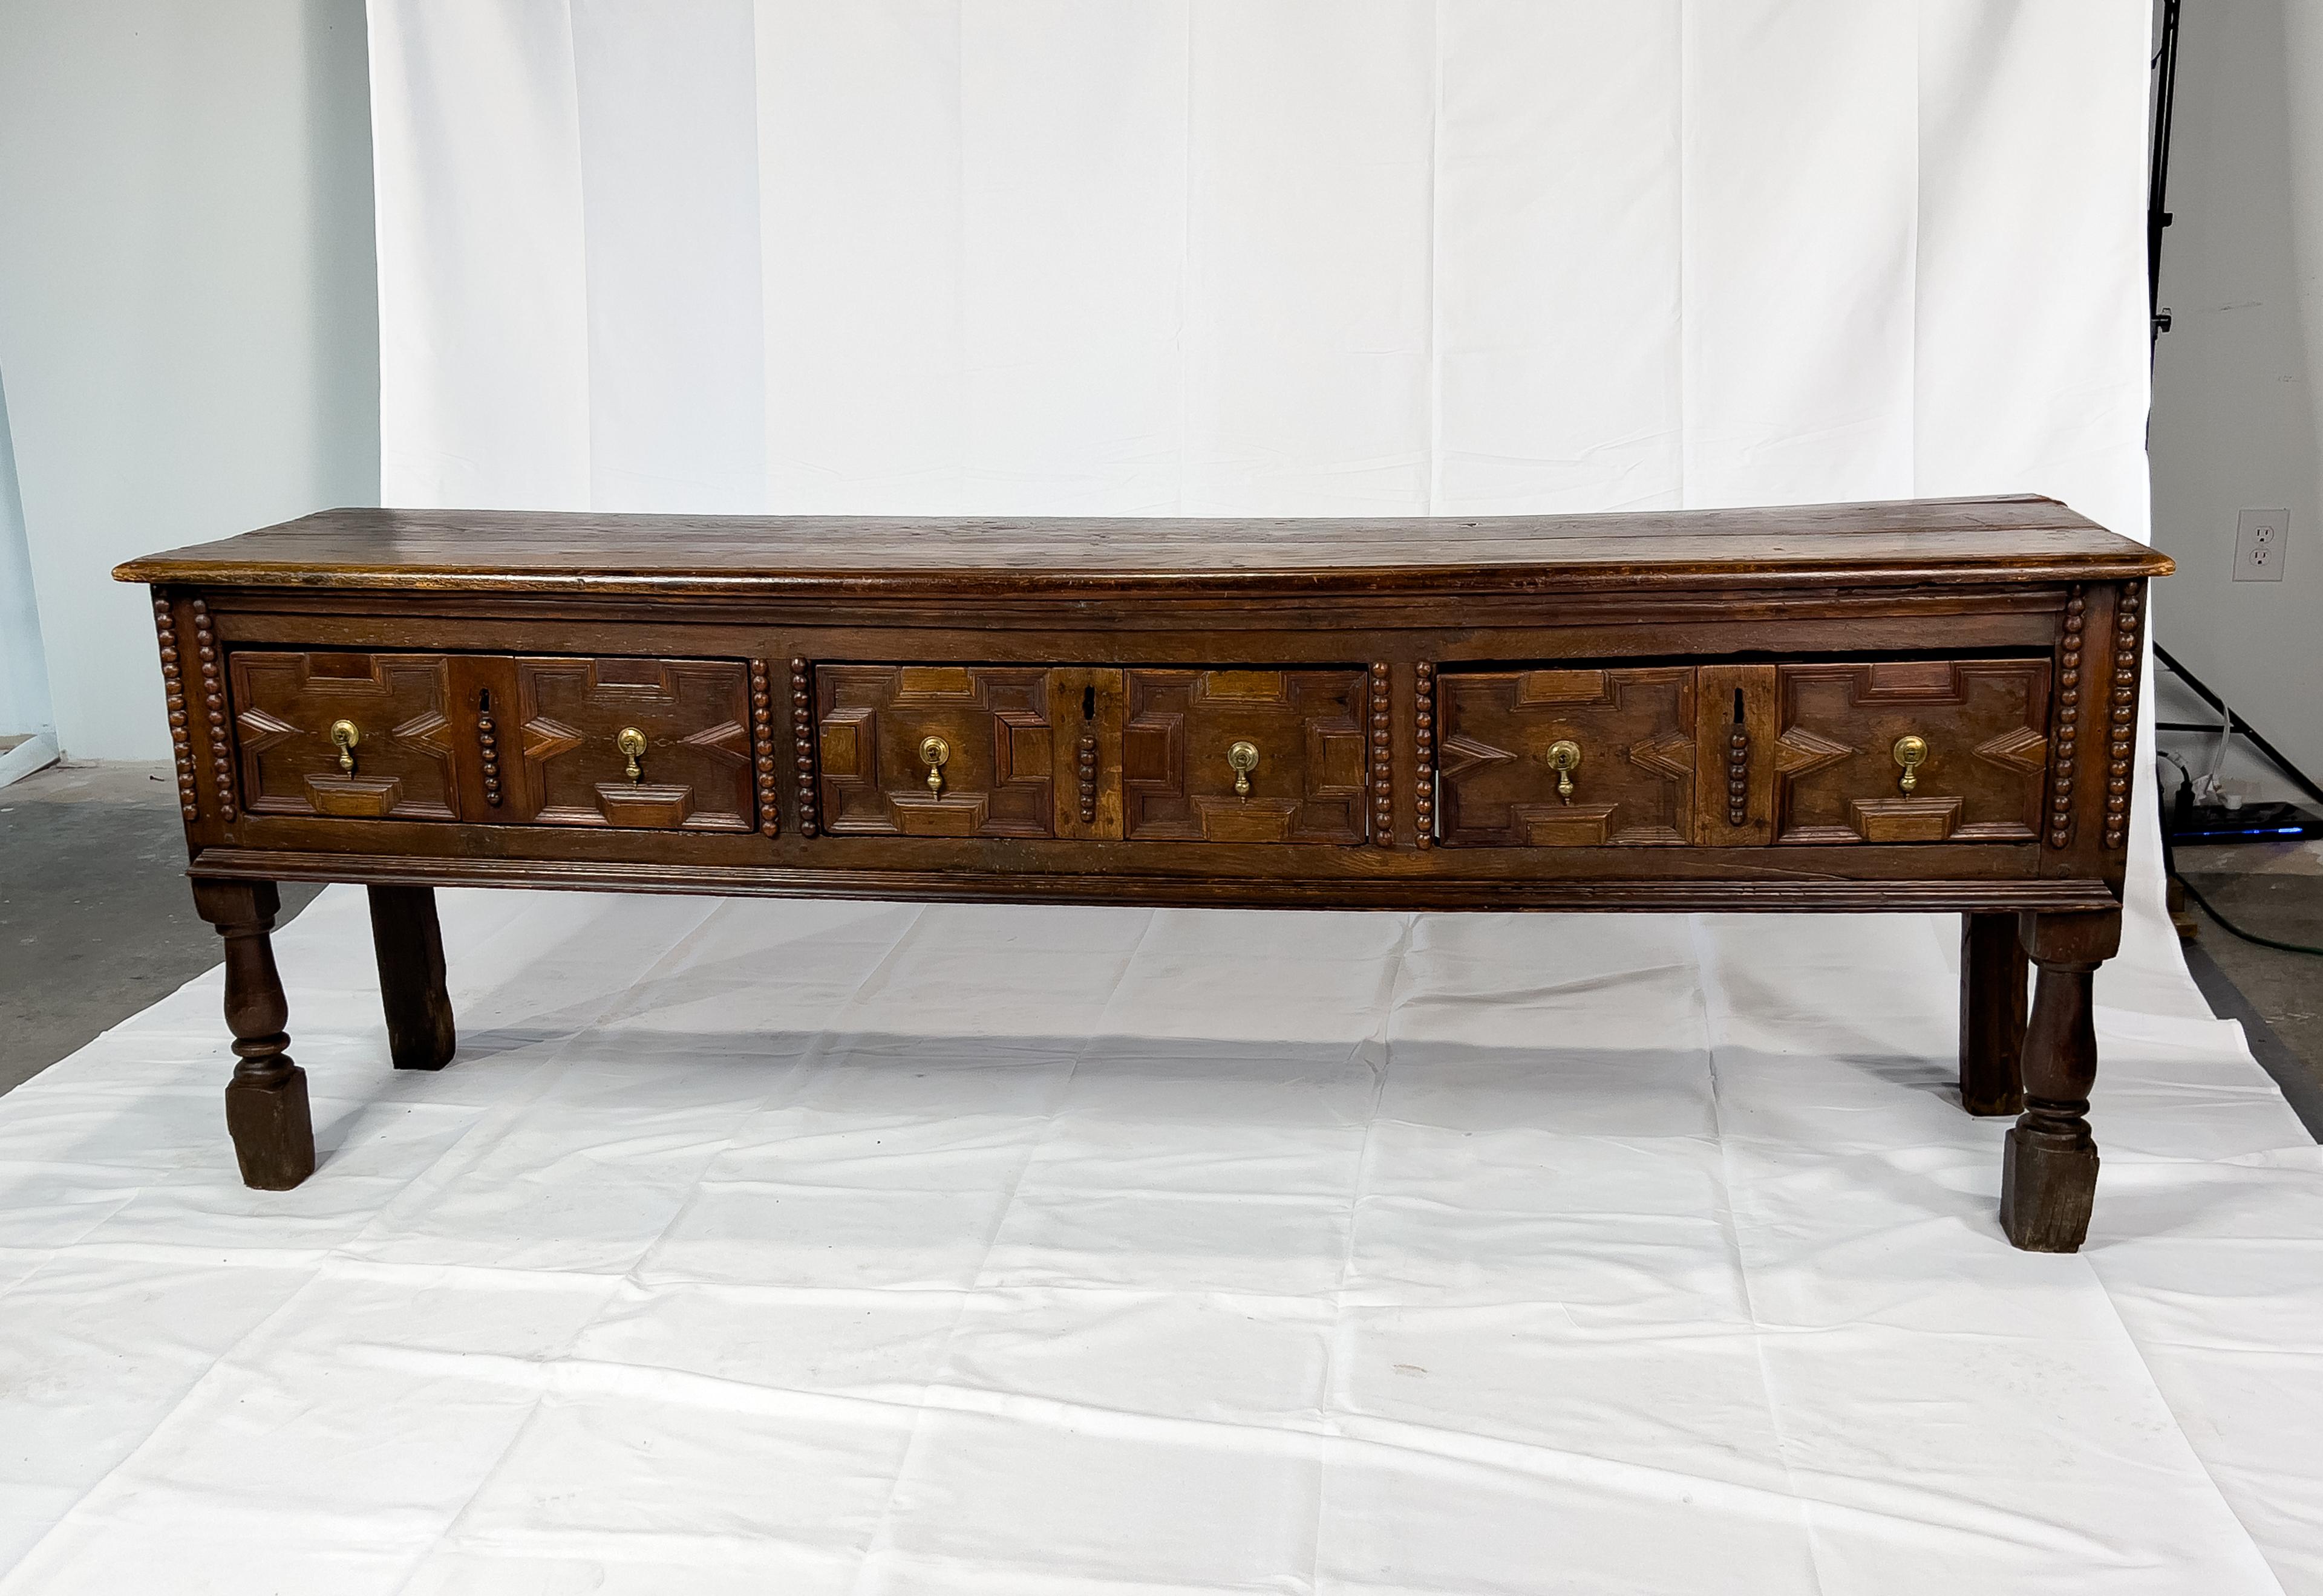 17th c. Oak Spanish console with amazing patina and brass tear drop hardware. The console has three paneled drawers above two turned front legs and two straight back legs.